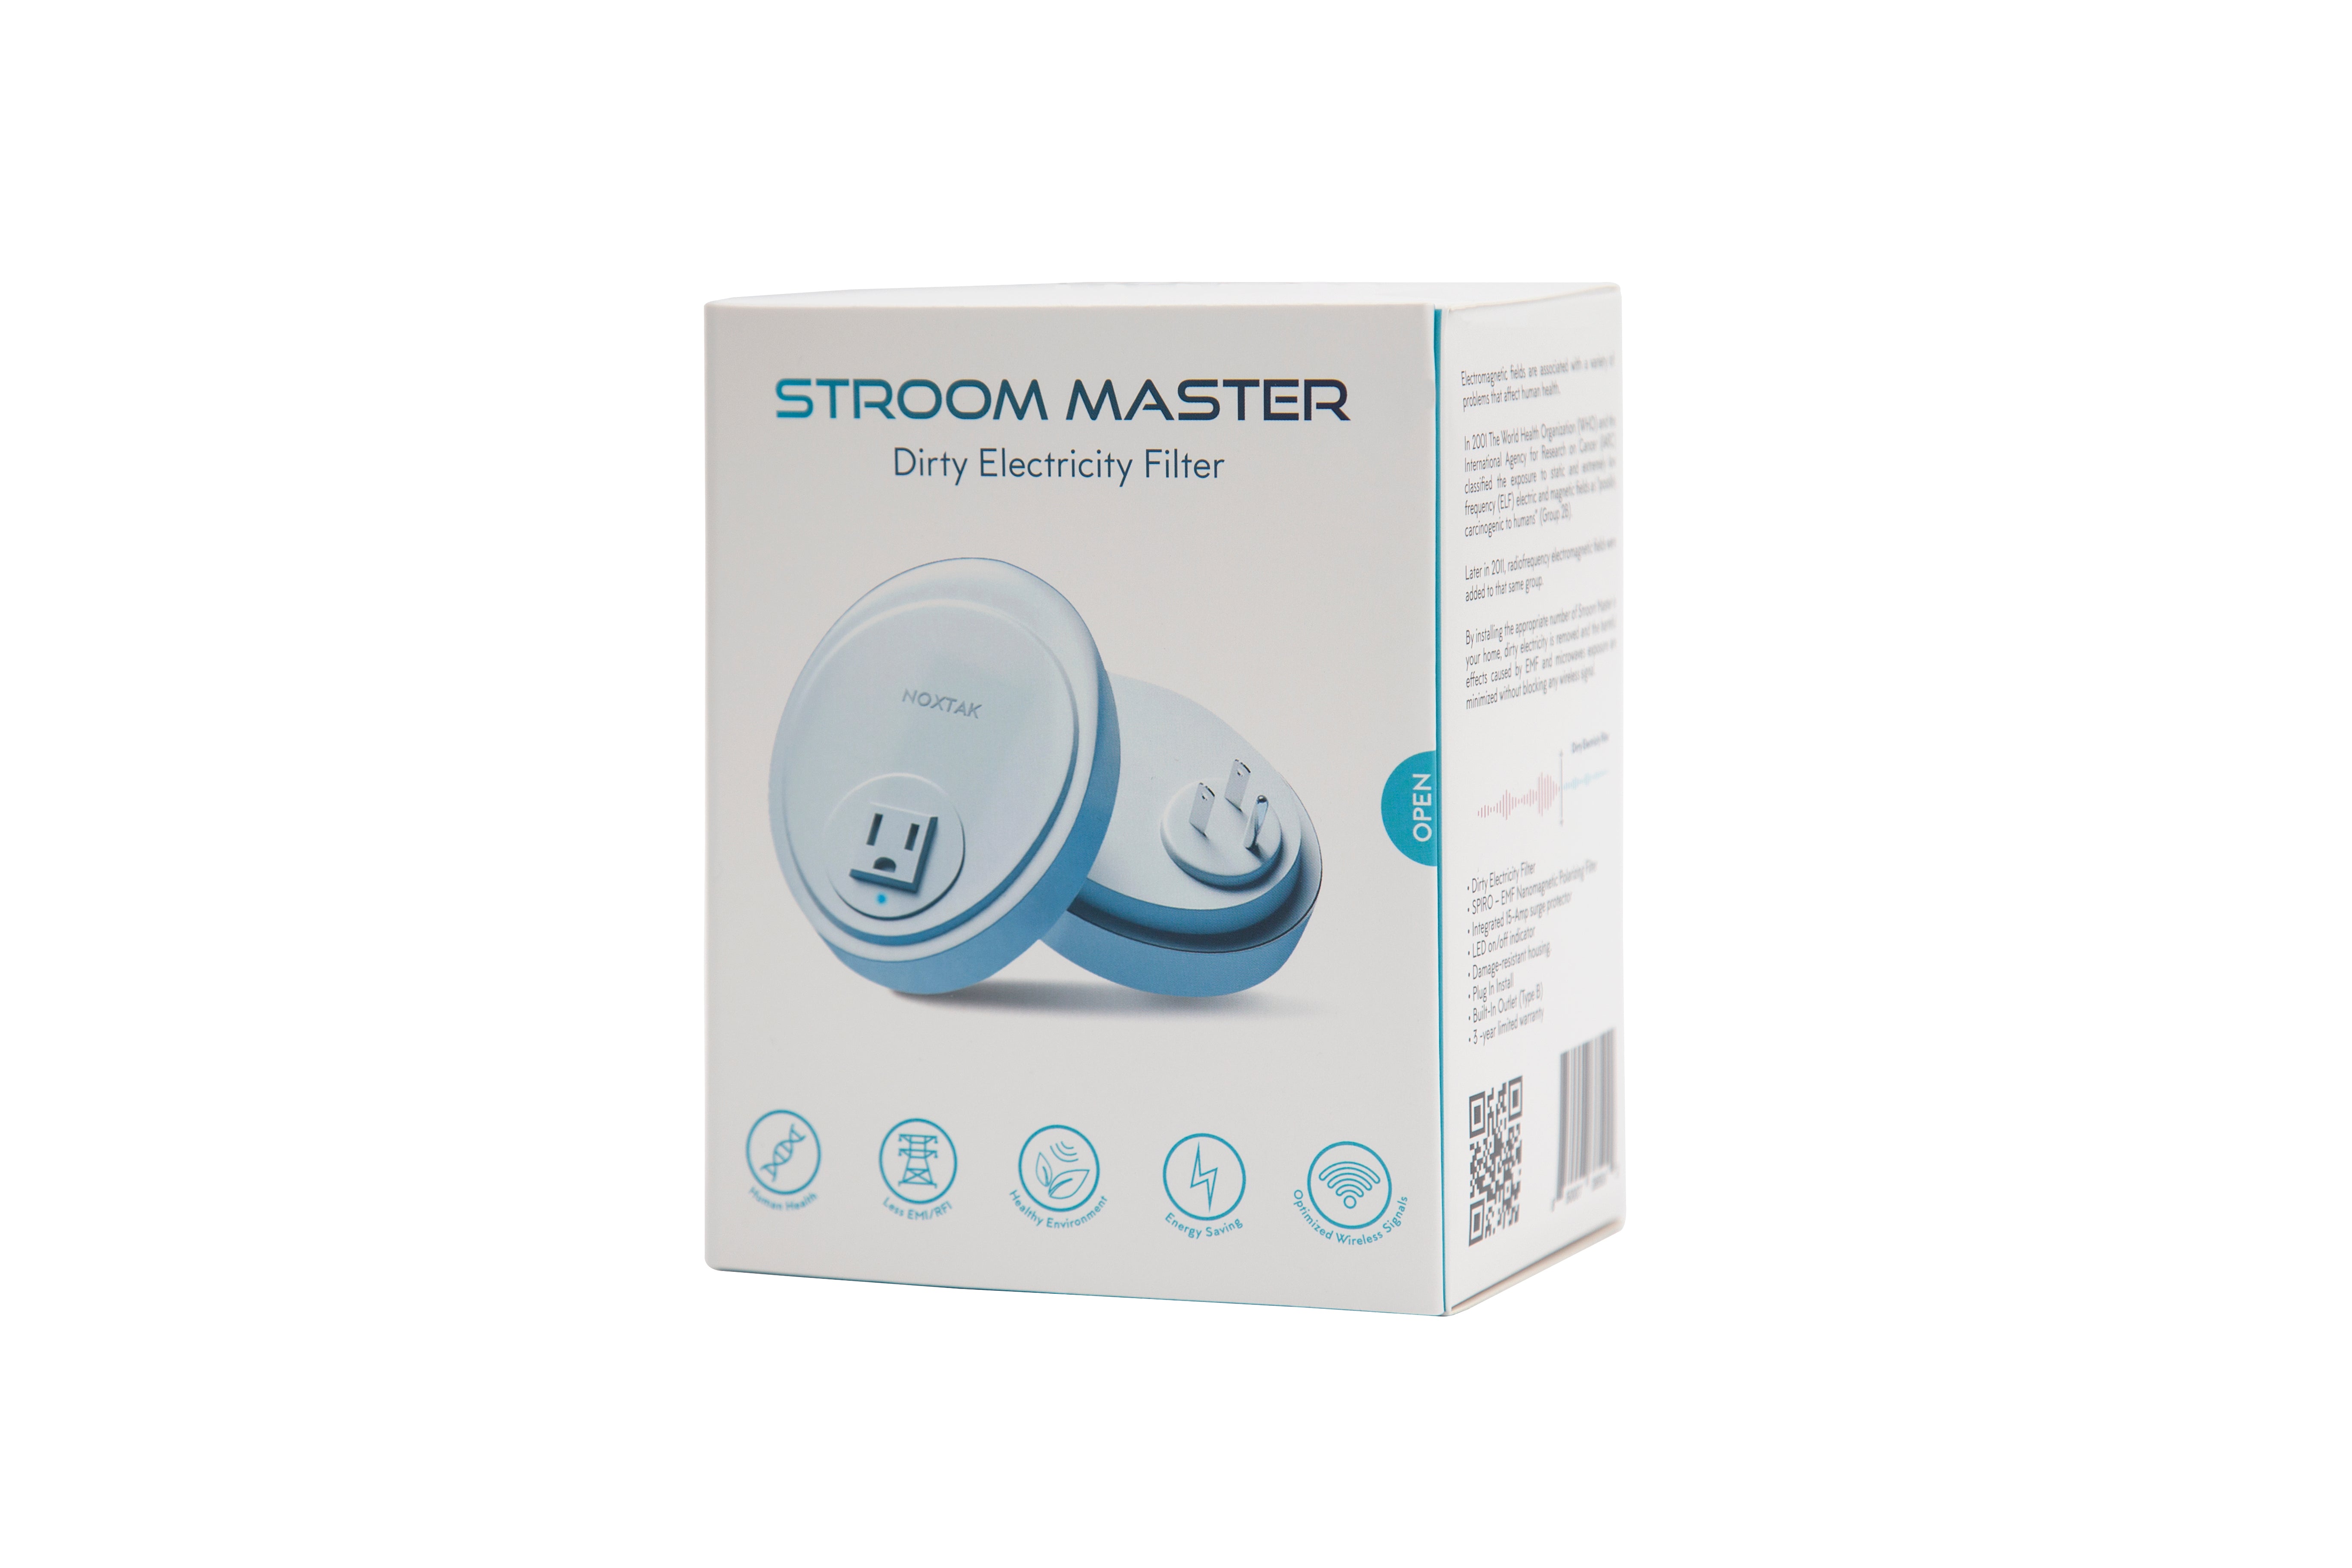 8. STROOM MASTER® – Advanced Electromagnetic Filter for Dirty Electricity